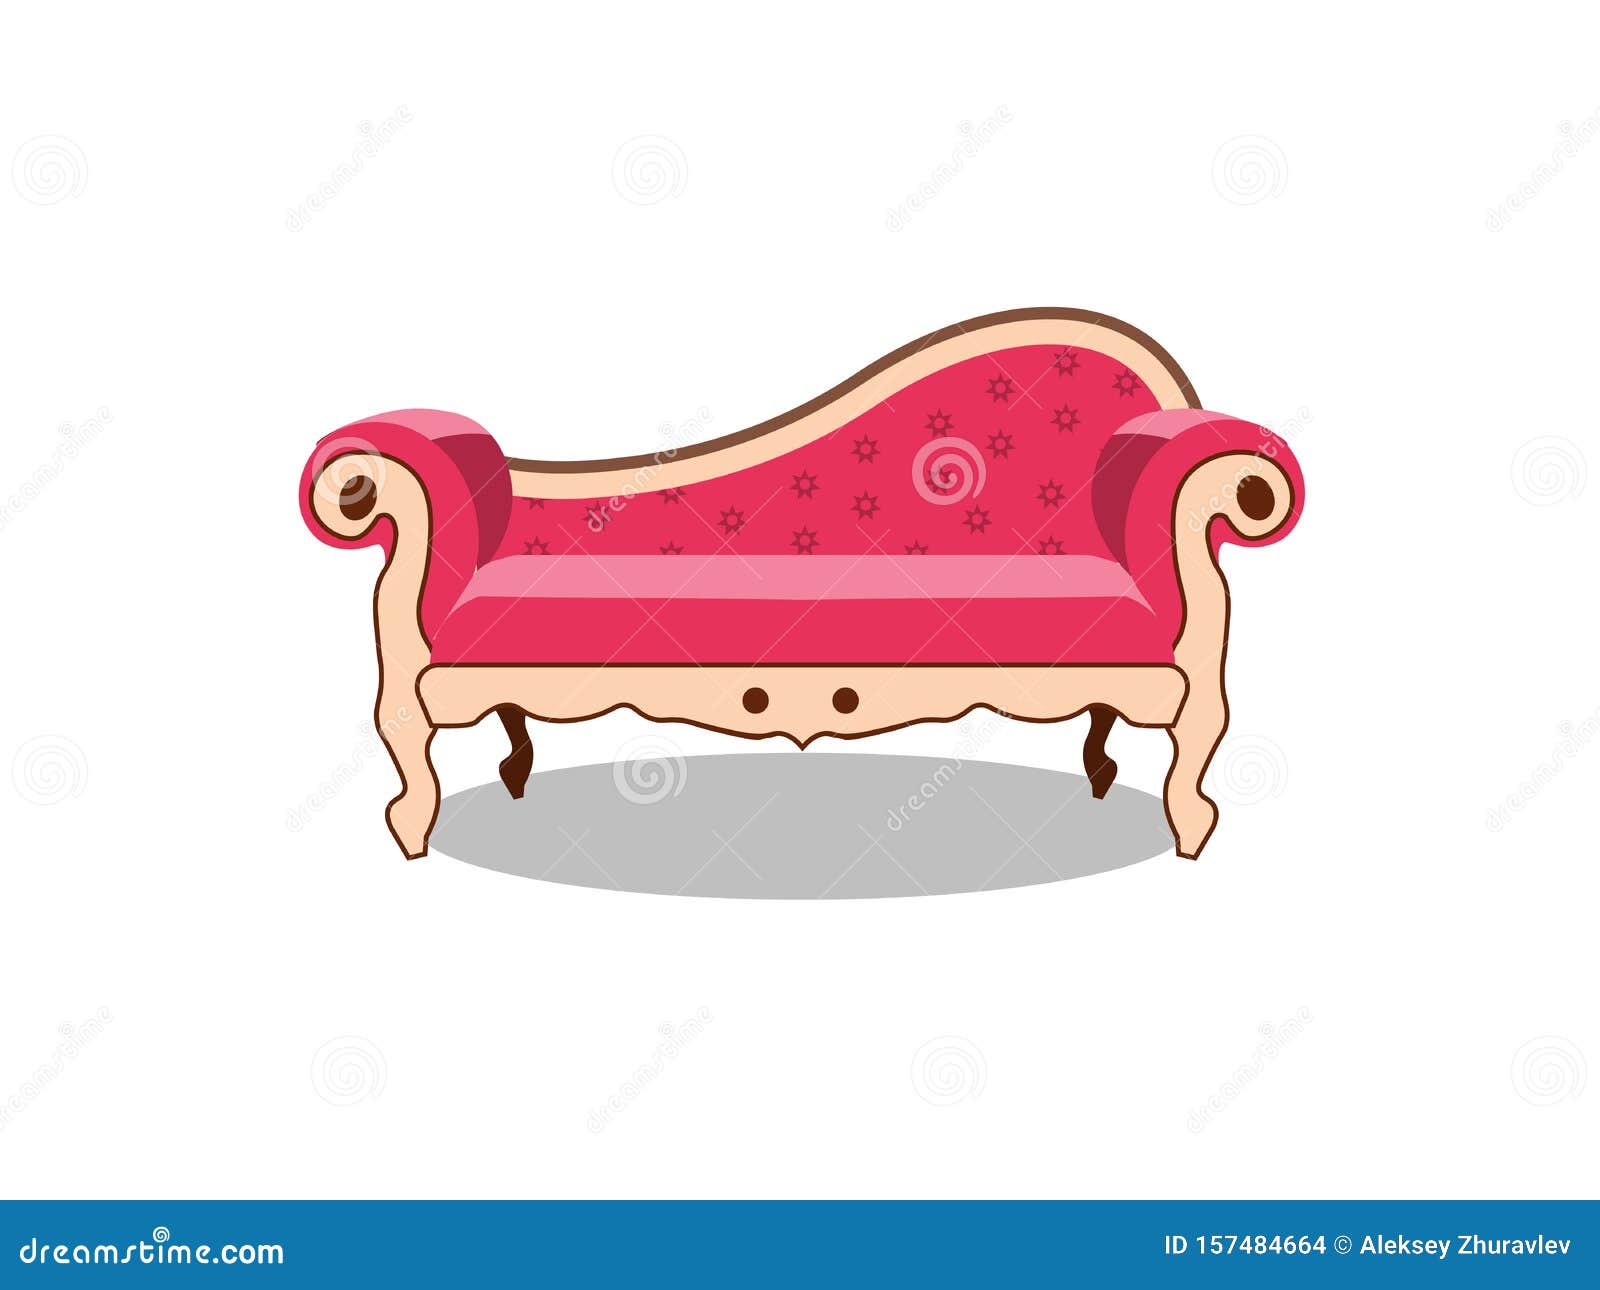 Realistic Luxurious Pink Sofa With Carved Legs Isolated On